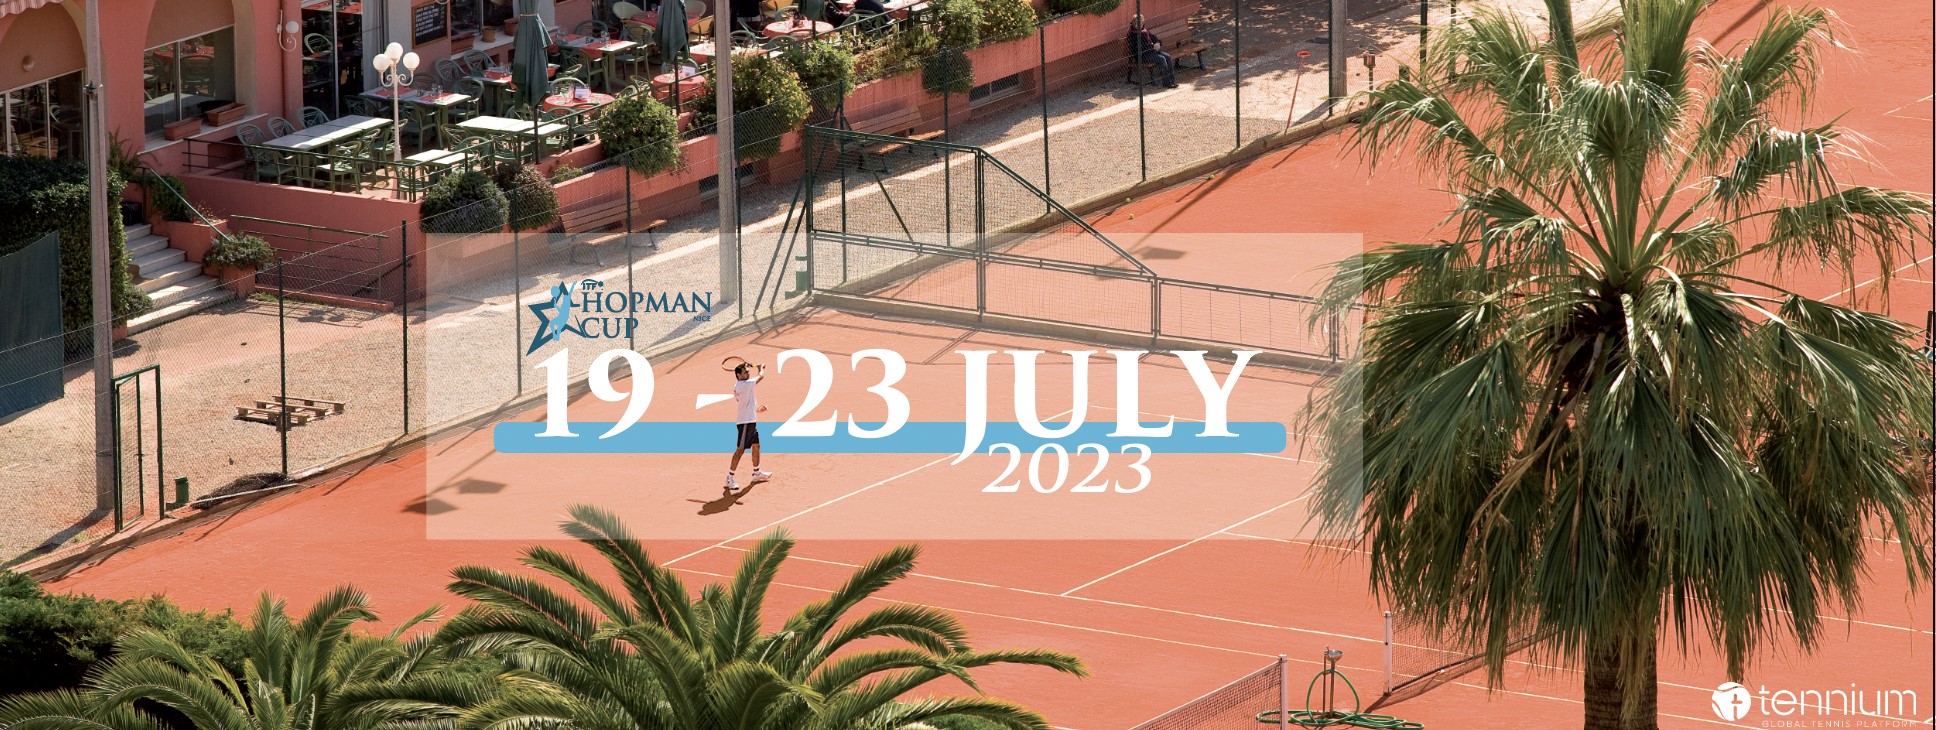 Schedule announced for 2023 Hopman Cup | ITF